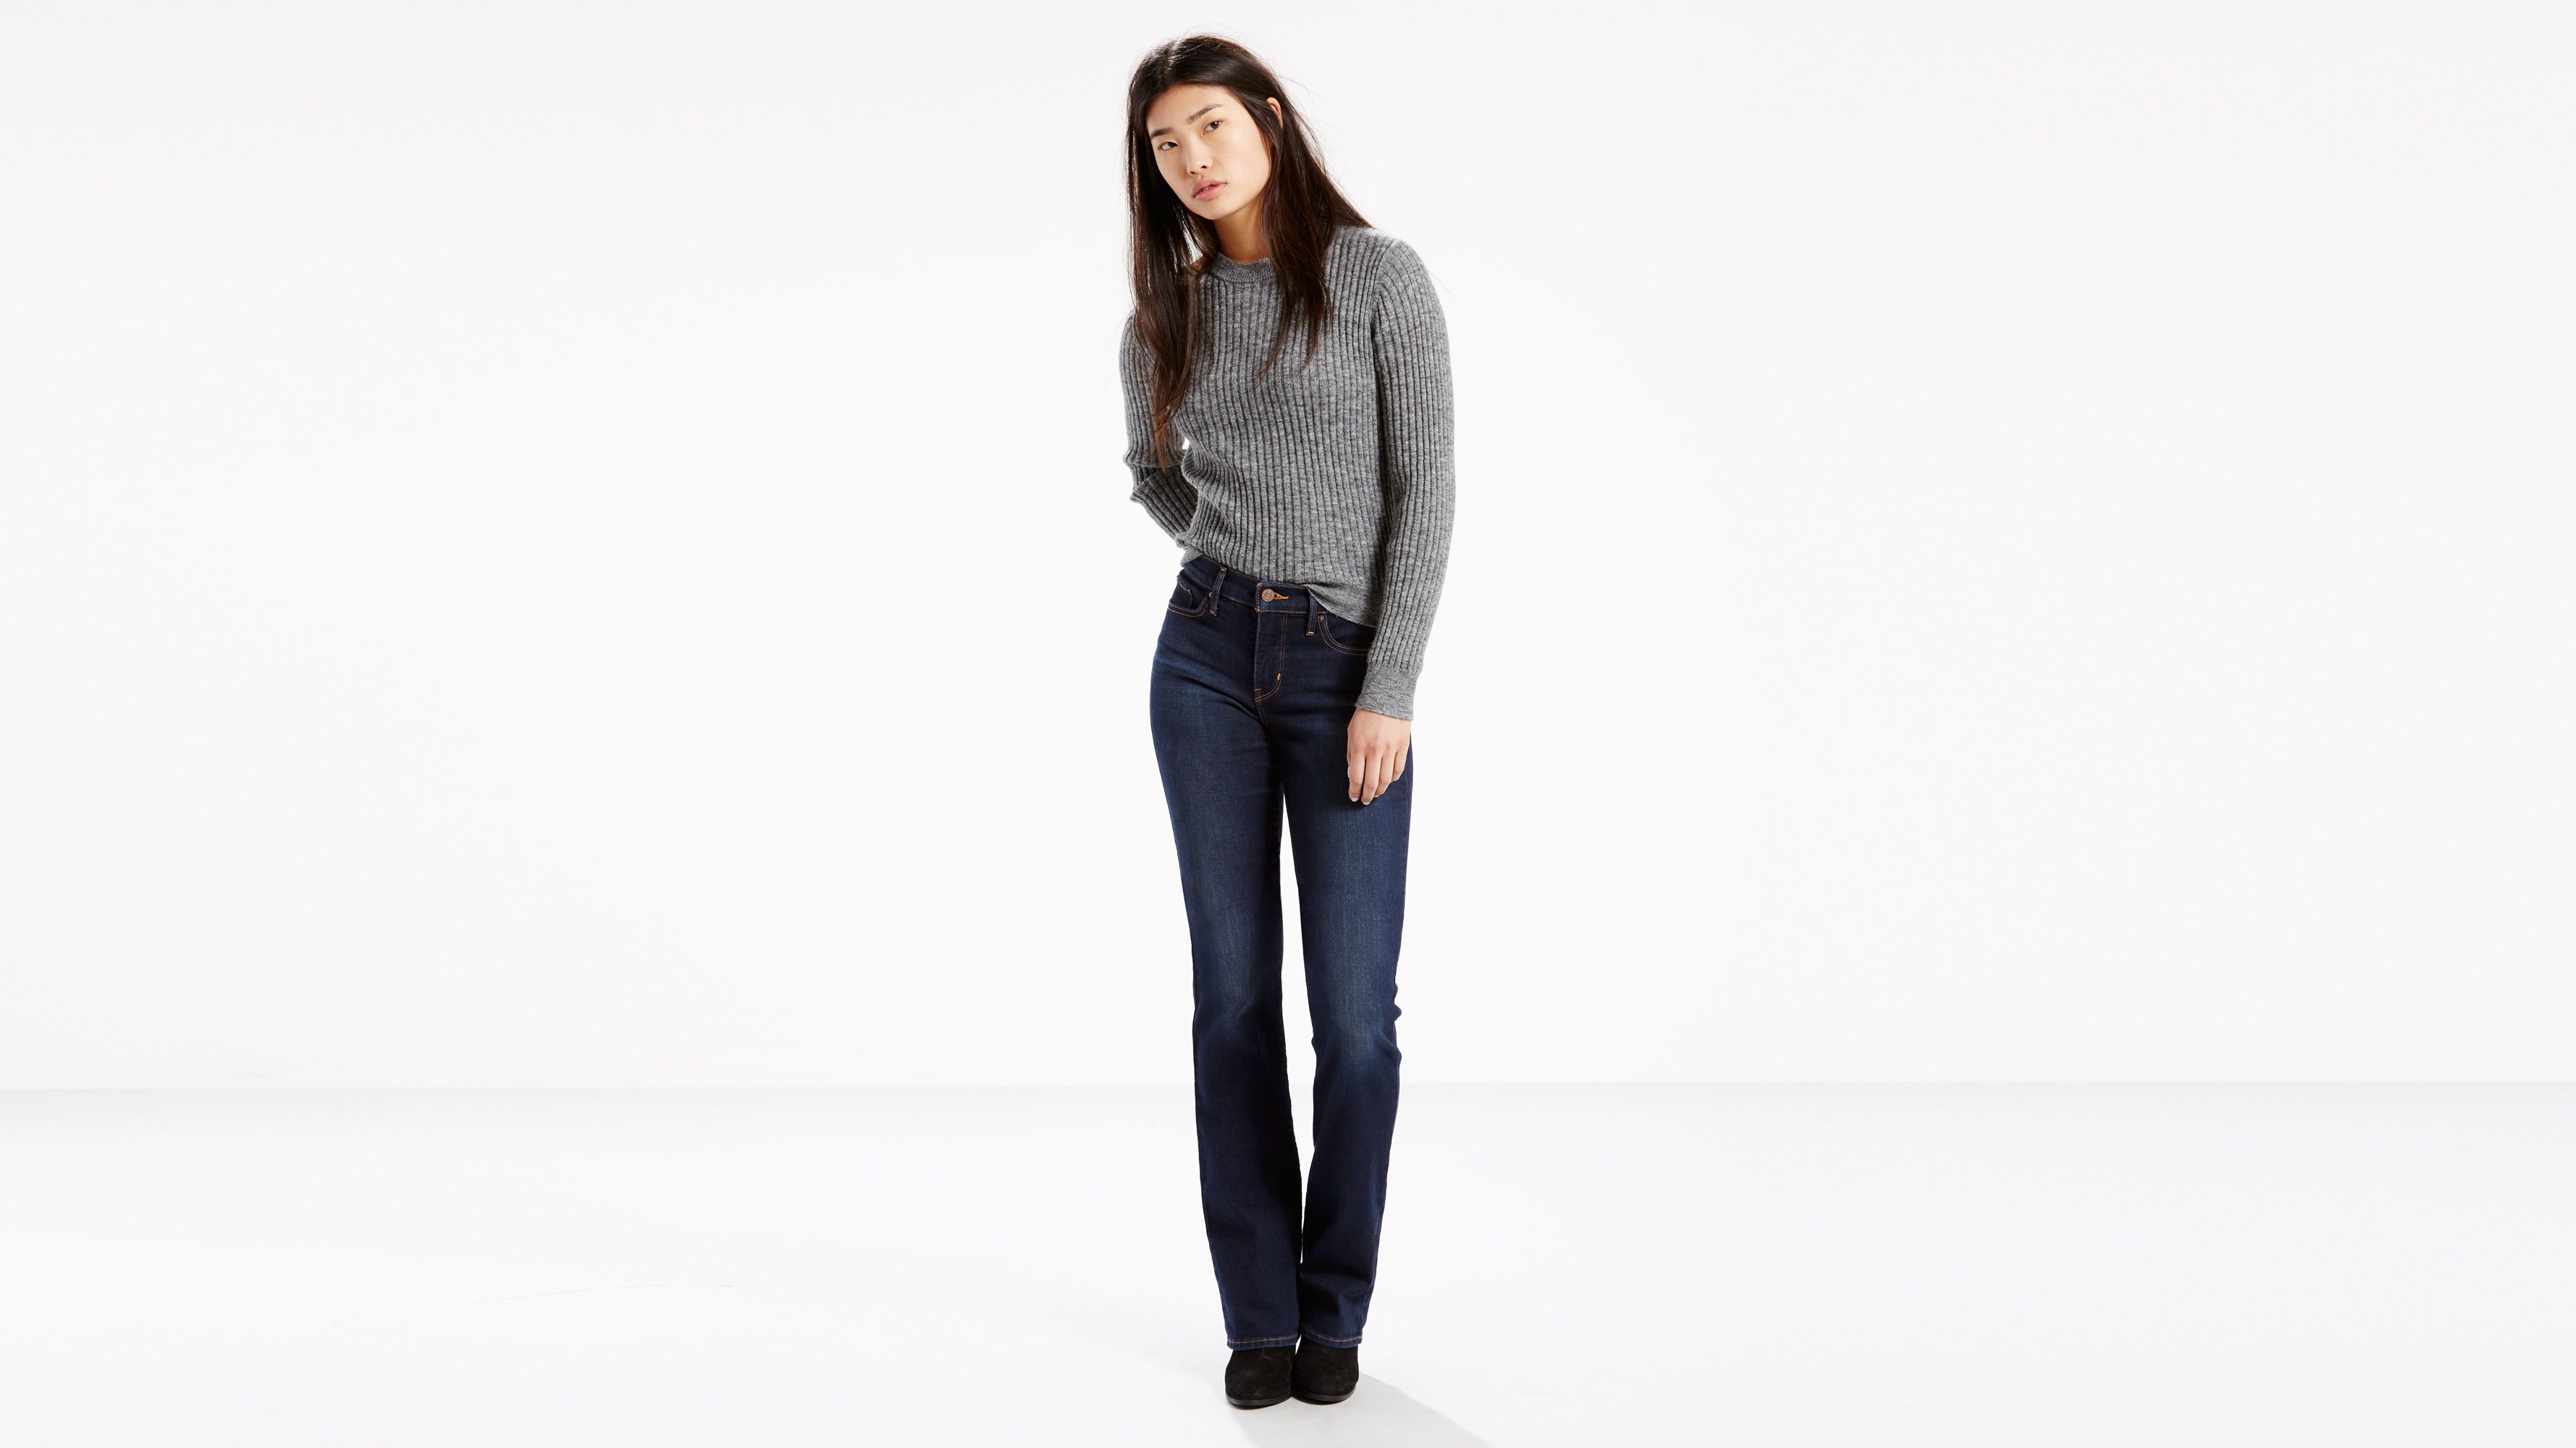 levi's bootcut jeans 315 shaping boot